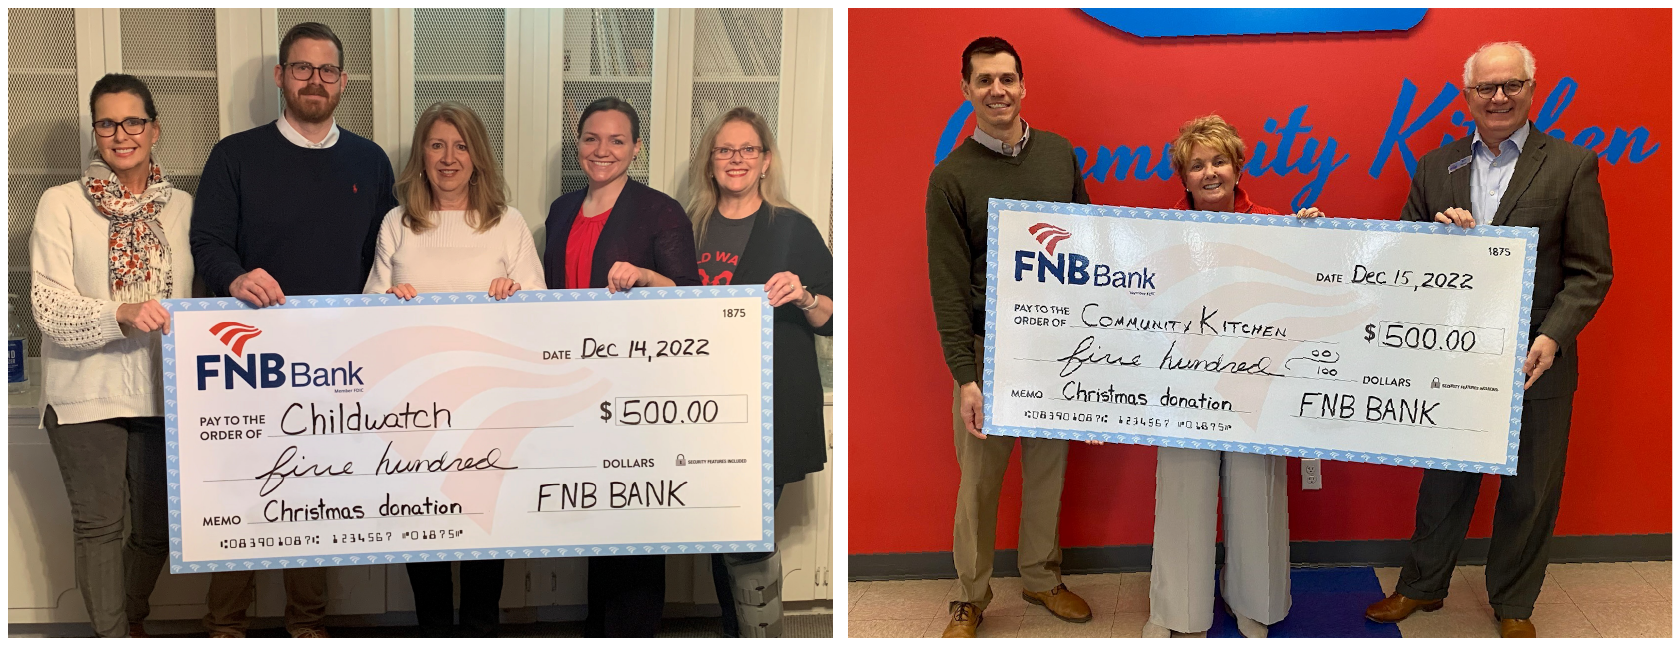 FNB Makes $1,000 Donation to Paducah Child Watch and Community Kitchen